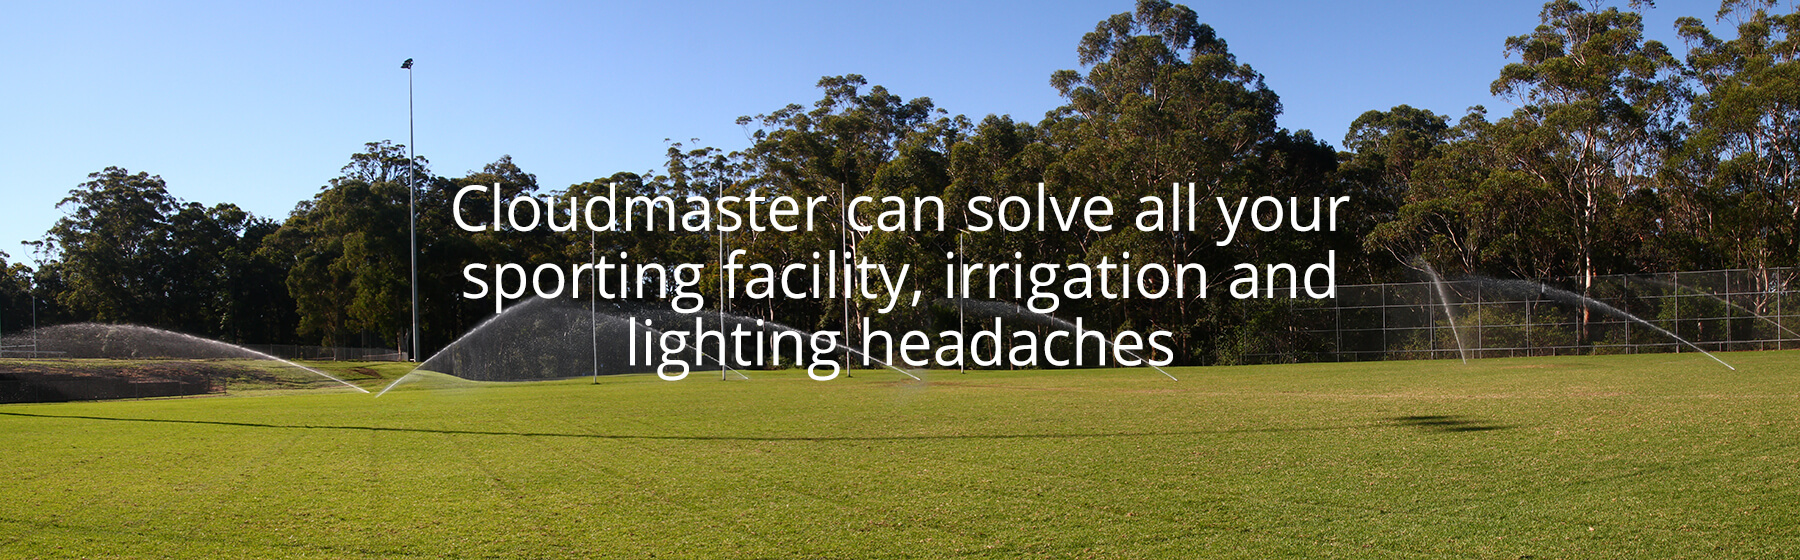 Cloudmaster can solve all your sporting facility, irrigation and lighting headaches